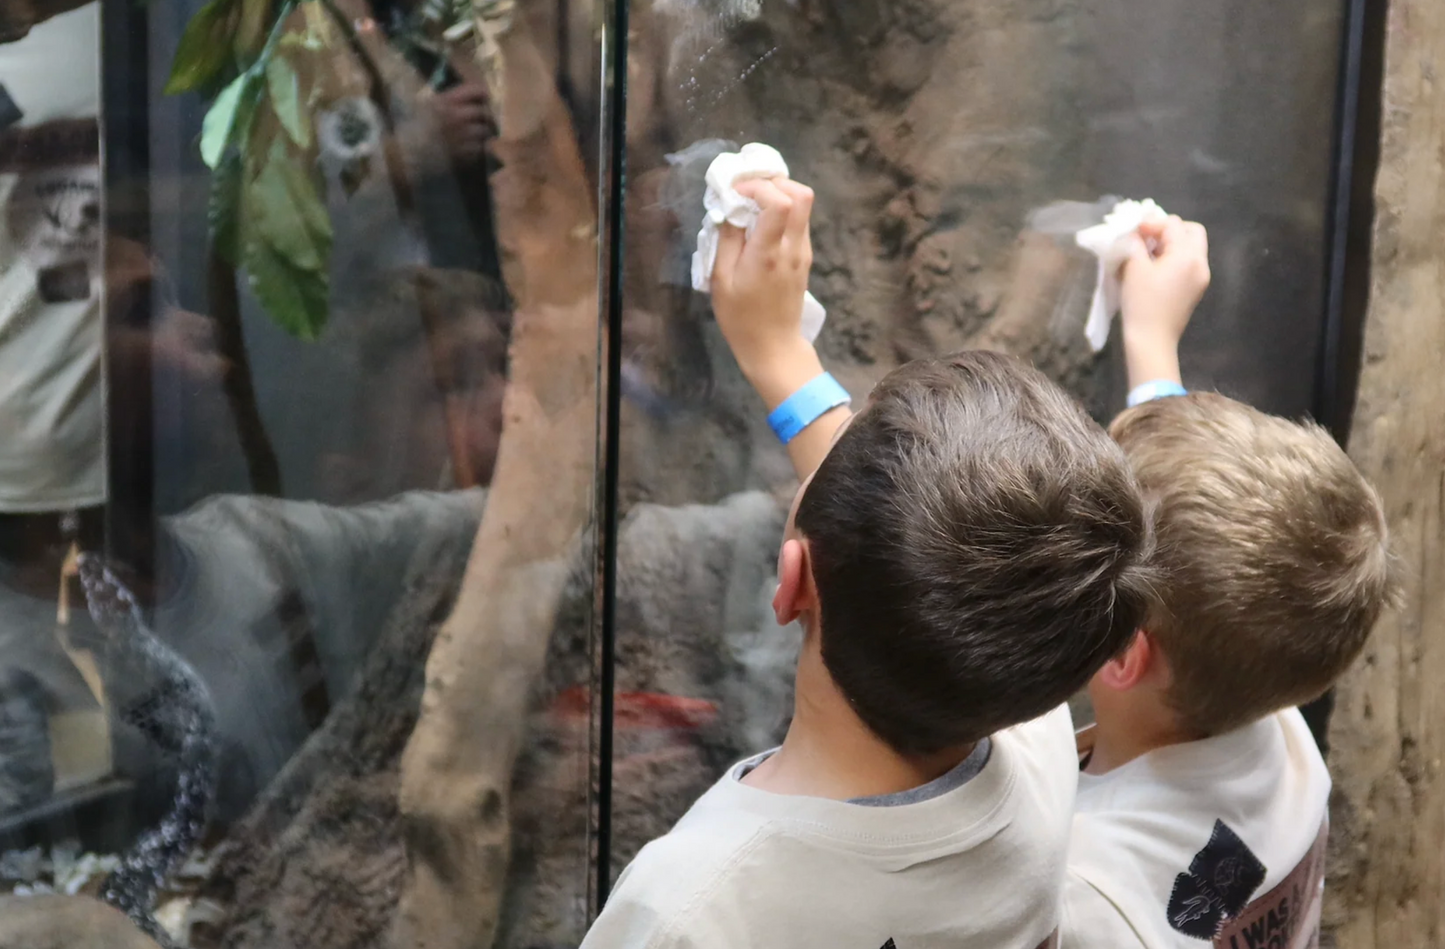 Junior Zookeeper Day at The Reptarium - Wednesday, April 10th- 5:00 PM - 7:00 PM